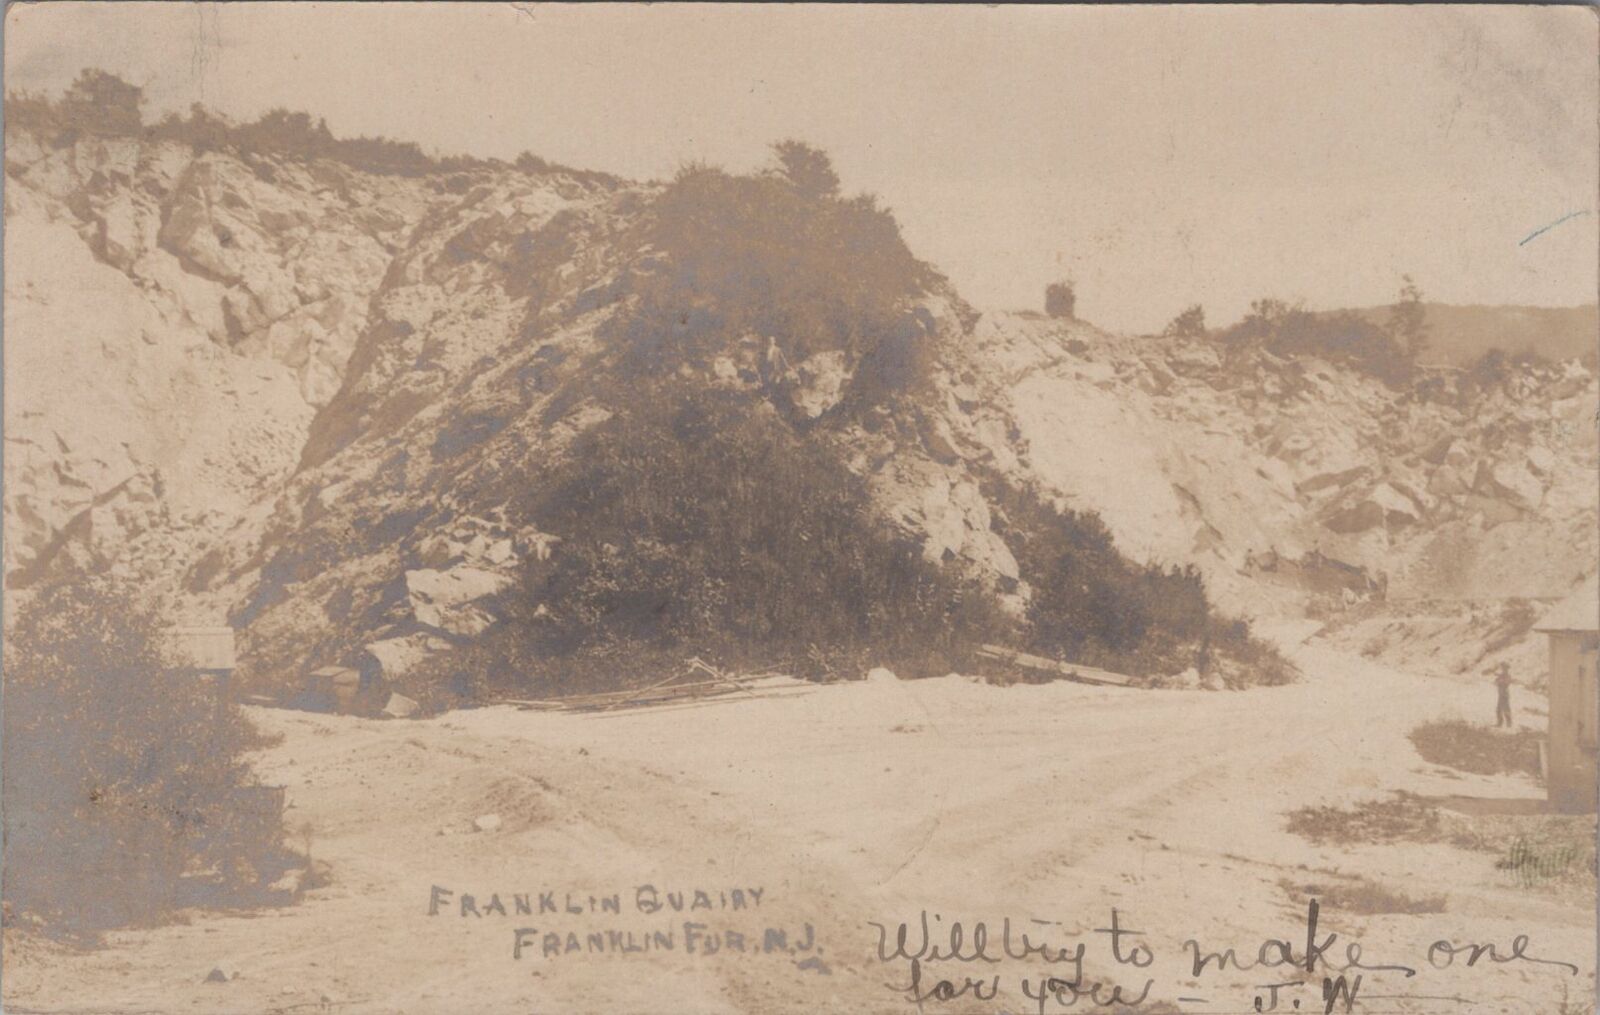 Franklin Quarry, New Jersey, Real Photo RPPC 1905 Middletown NY RPO PM